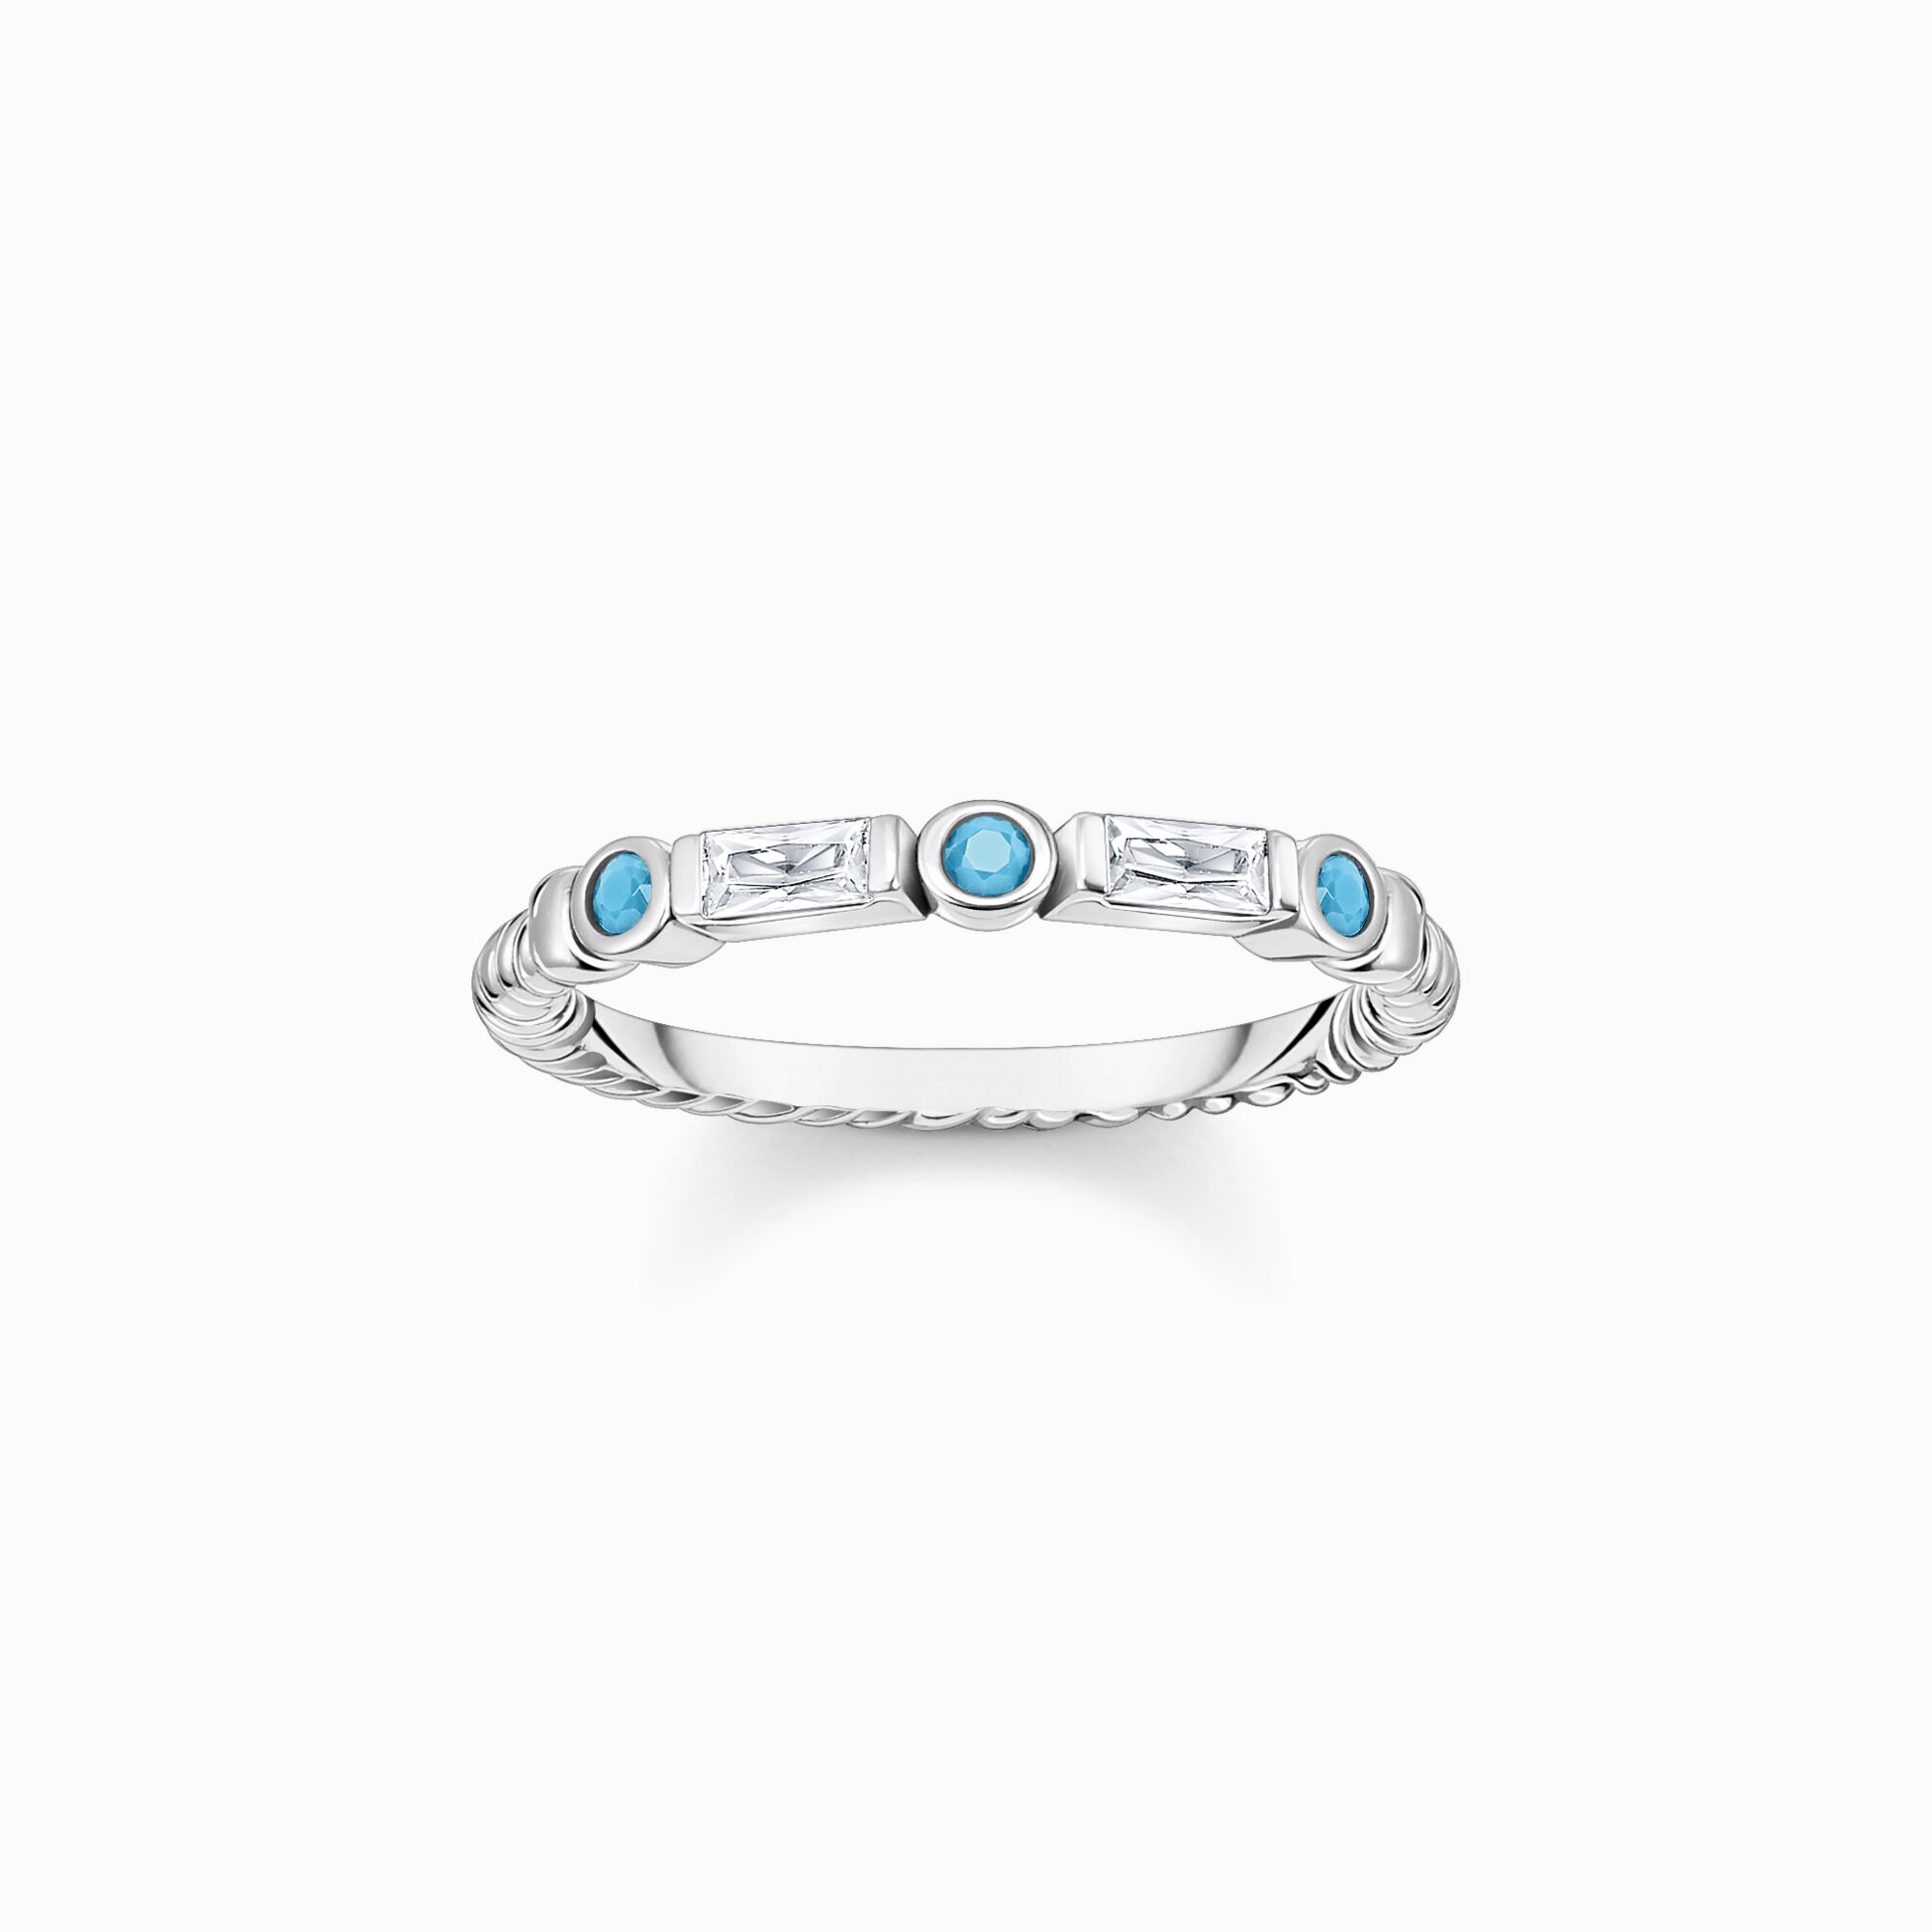 Band ring rope with turquoise and white stones gold plated from the  collection in the THOMAS SABO online store